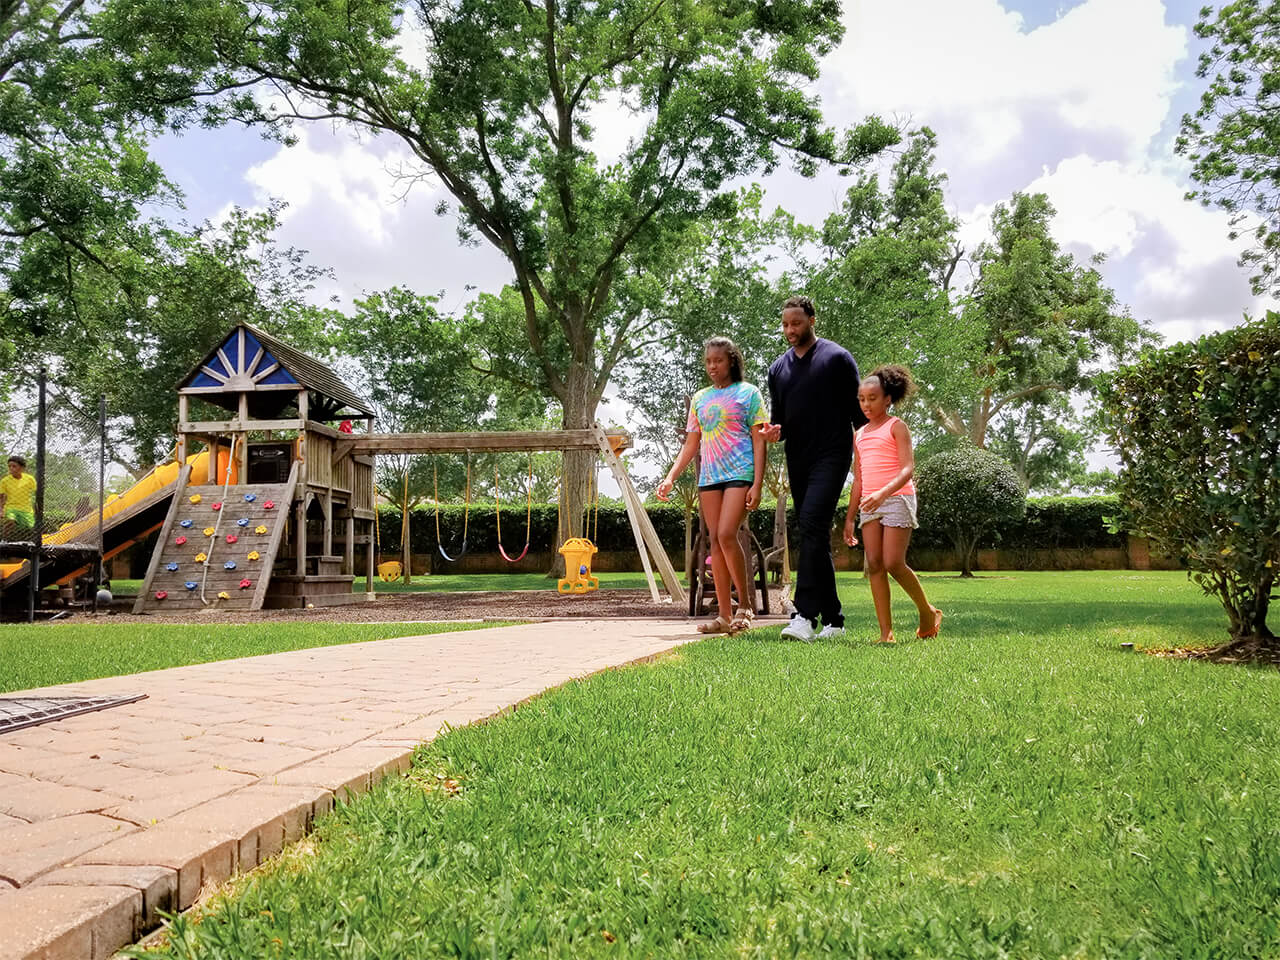 Houston, TX: Family firstâ€¦The McGrady family playing in the back yard of their home. - Captured on a Samsung Galaxy S8